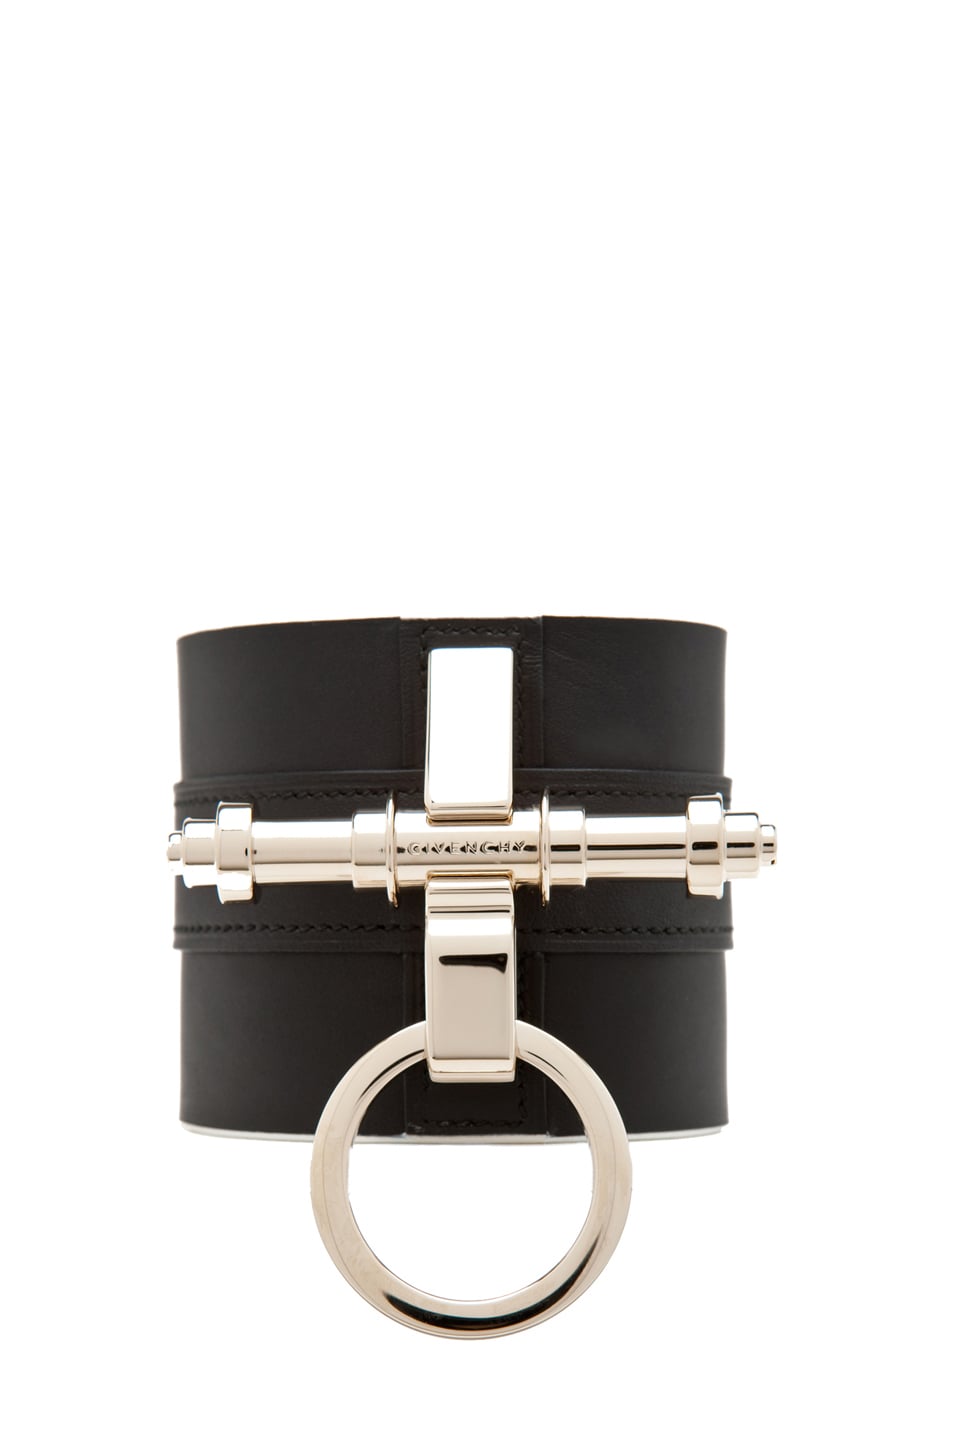 Givenchy Obsedia Large Cuff in Black & White | FWRD